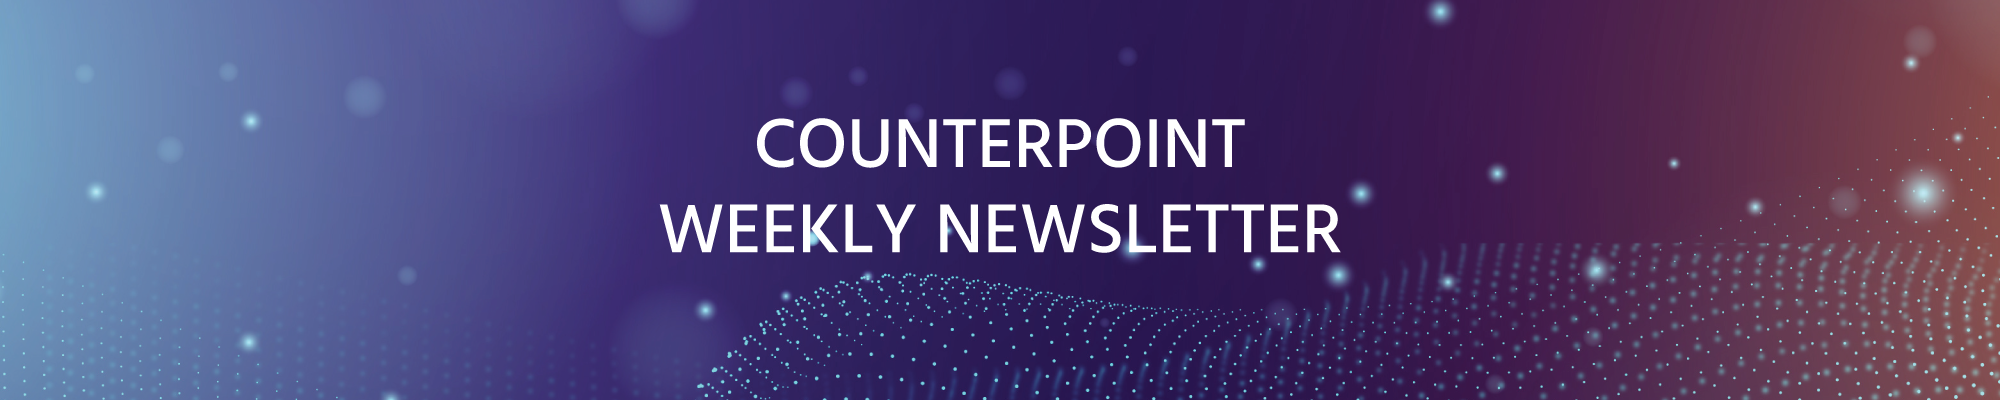 Counterpoint Weekly Newsletter